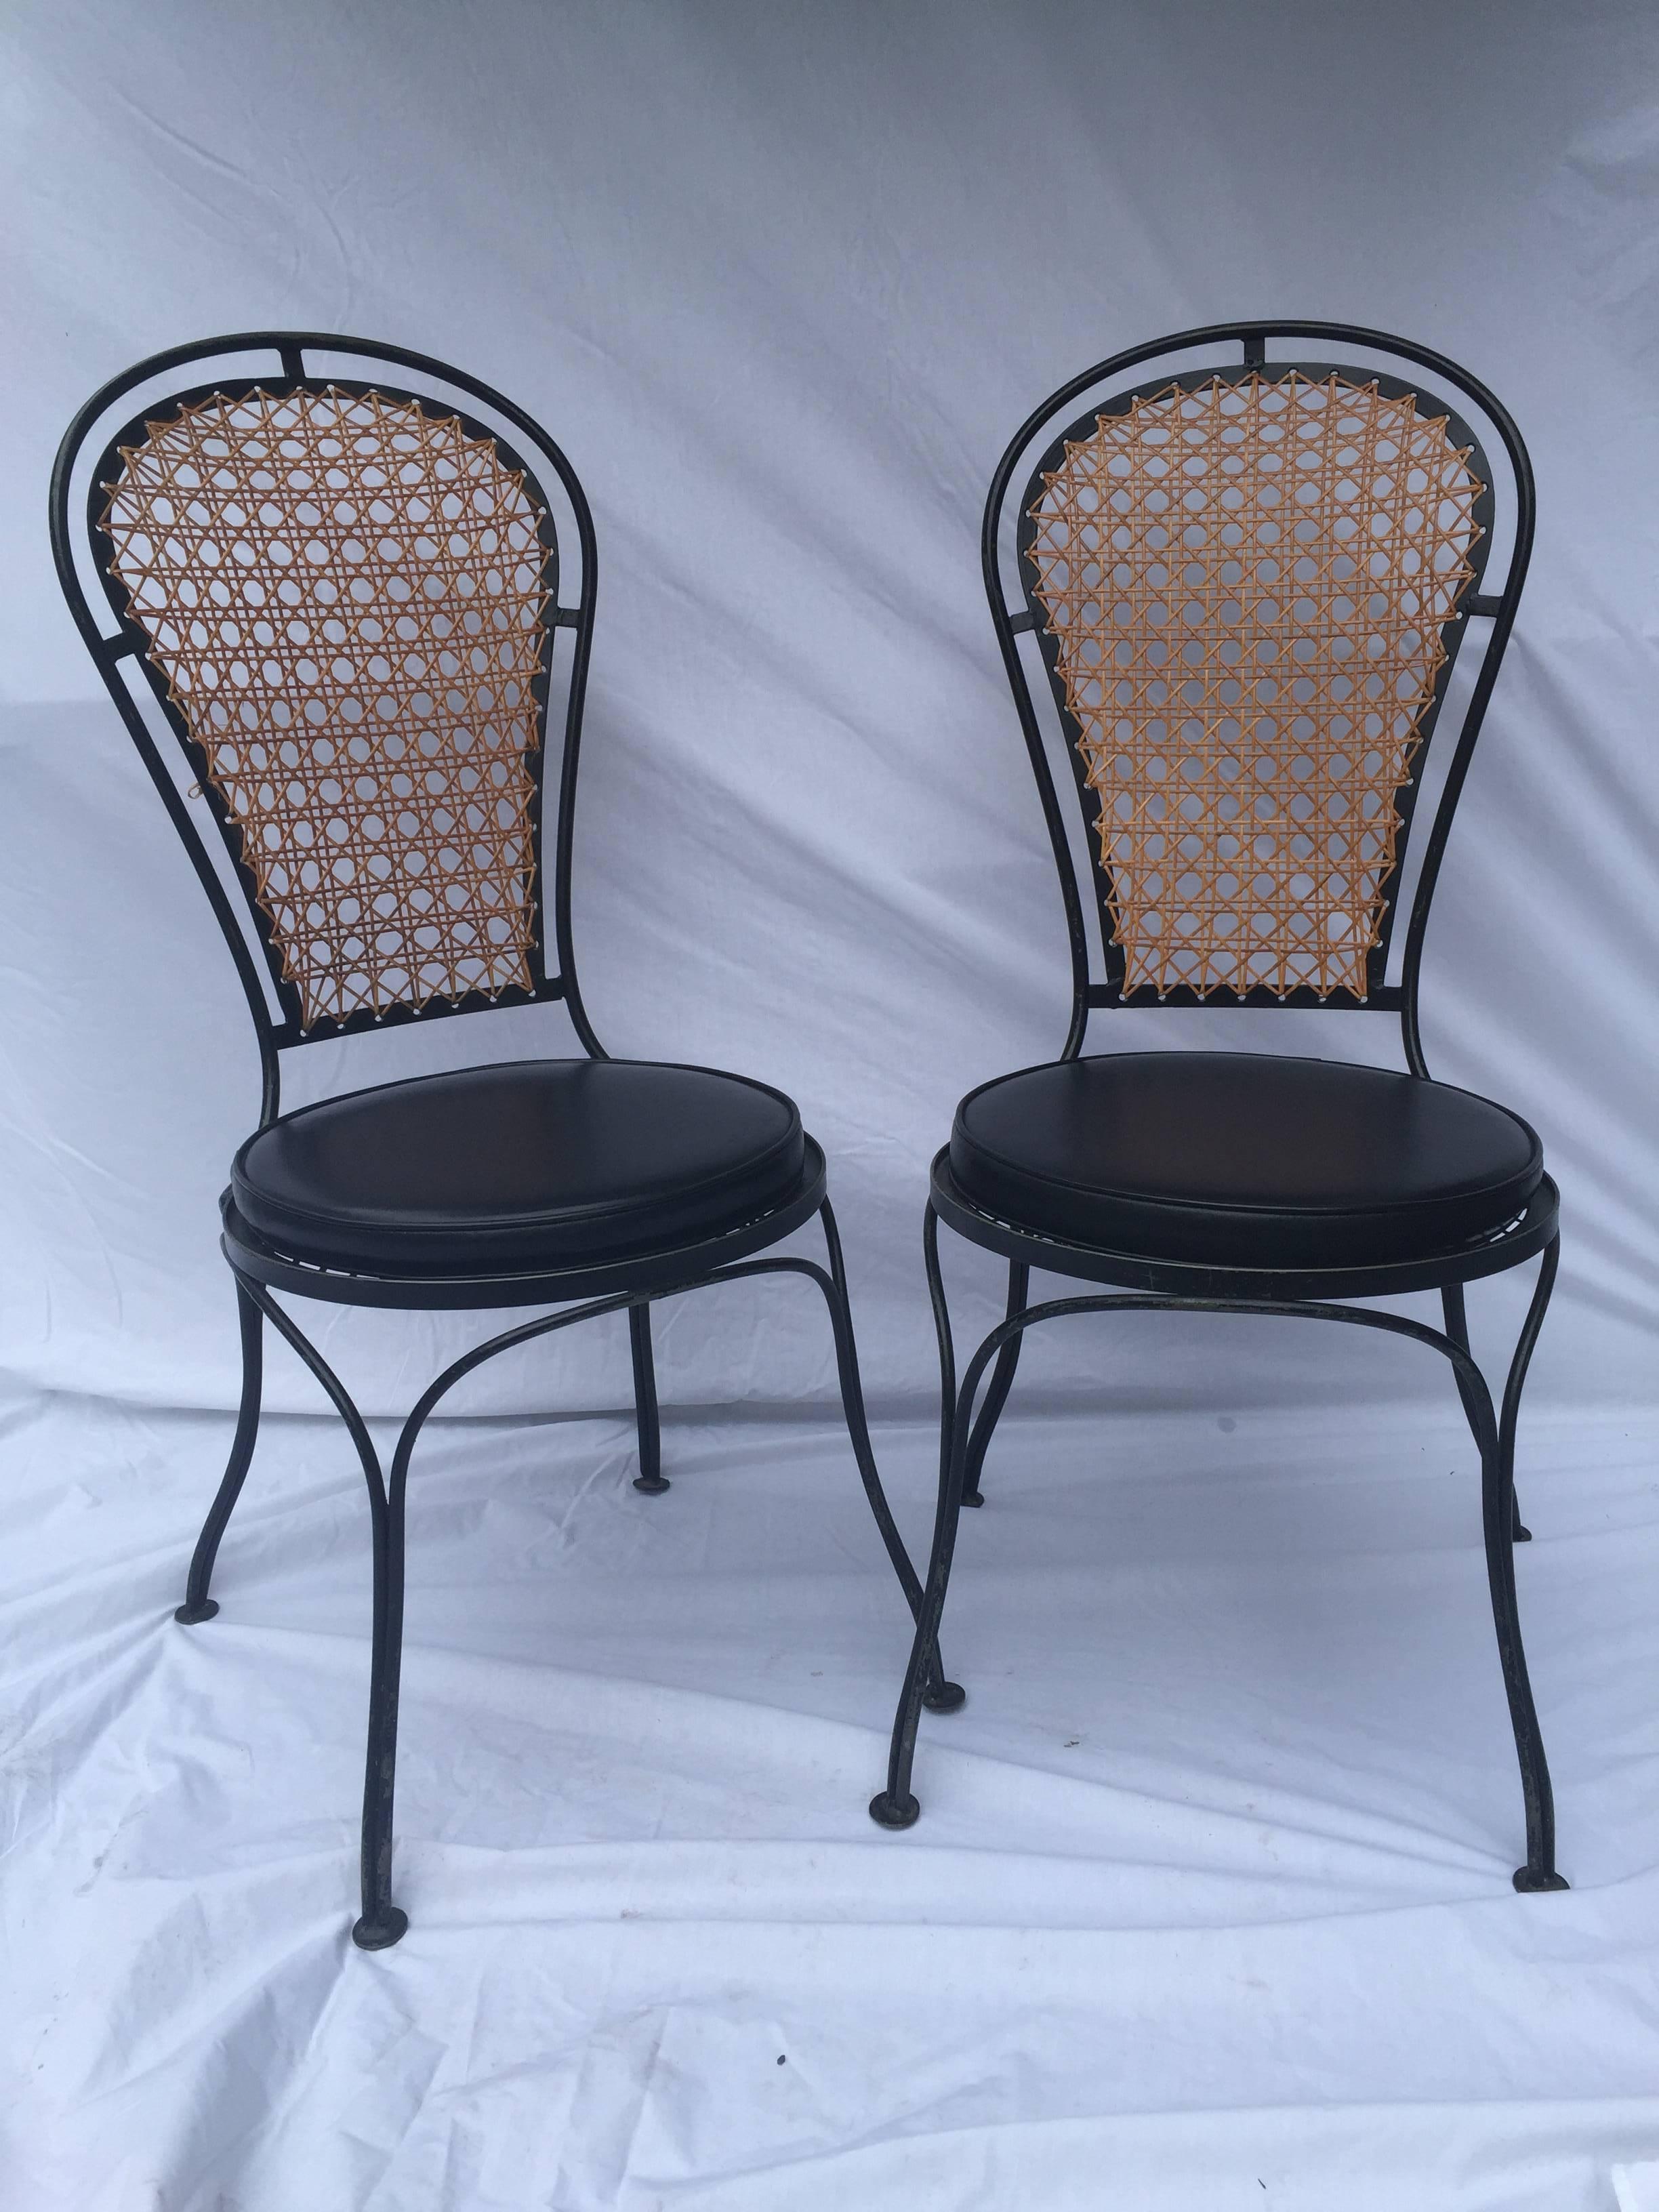 Pair of vintage iron balloon back style chairs with a woven cane back. Definitely in the style of Salterini. More measurements: Seat is 18.5 inches high with the cushion, the width and depth at the feet is 18.5 inches by 18.5 inches.